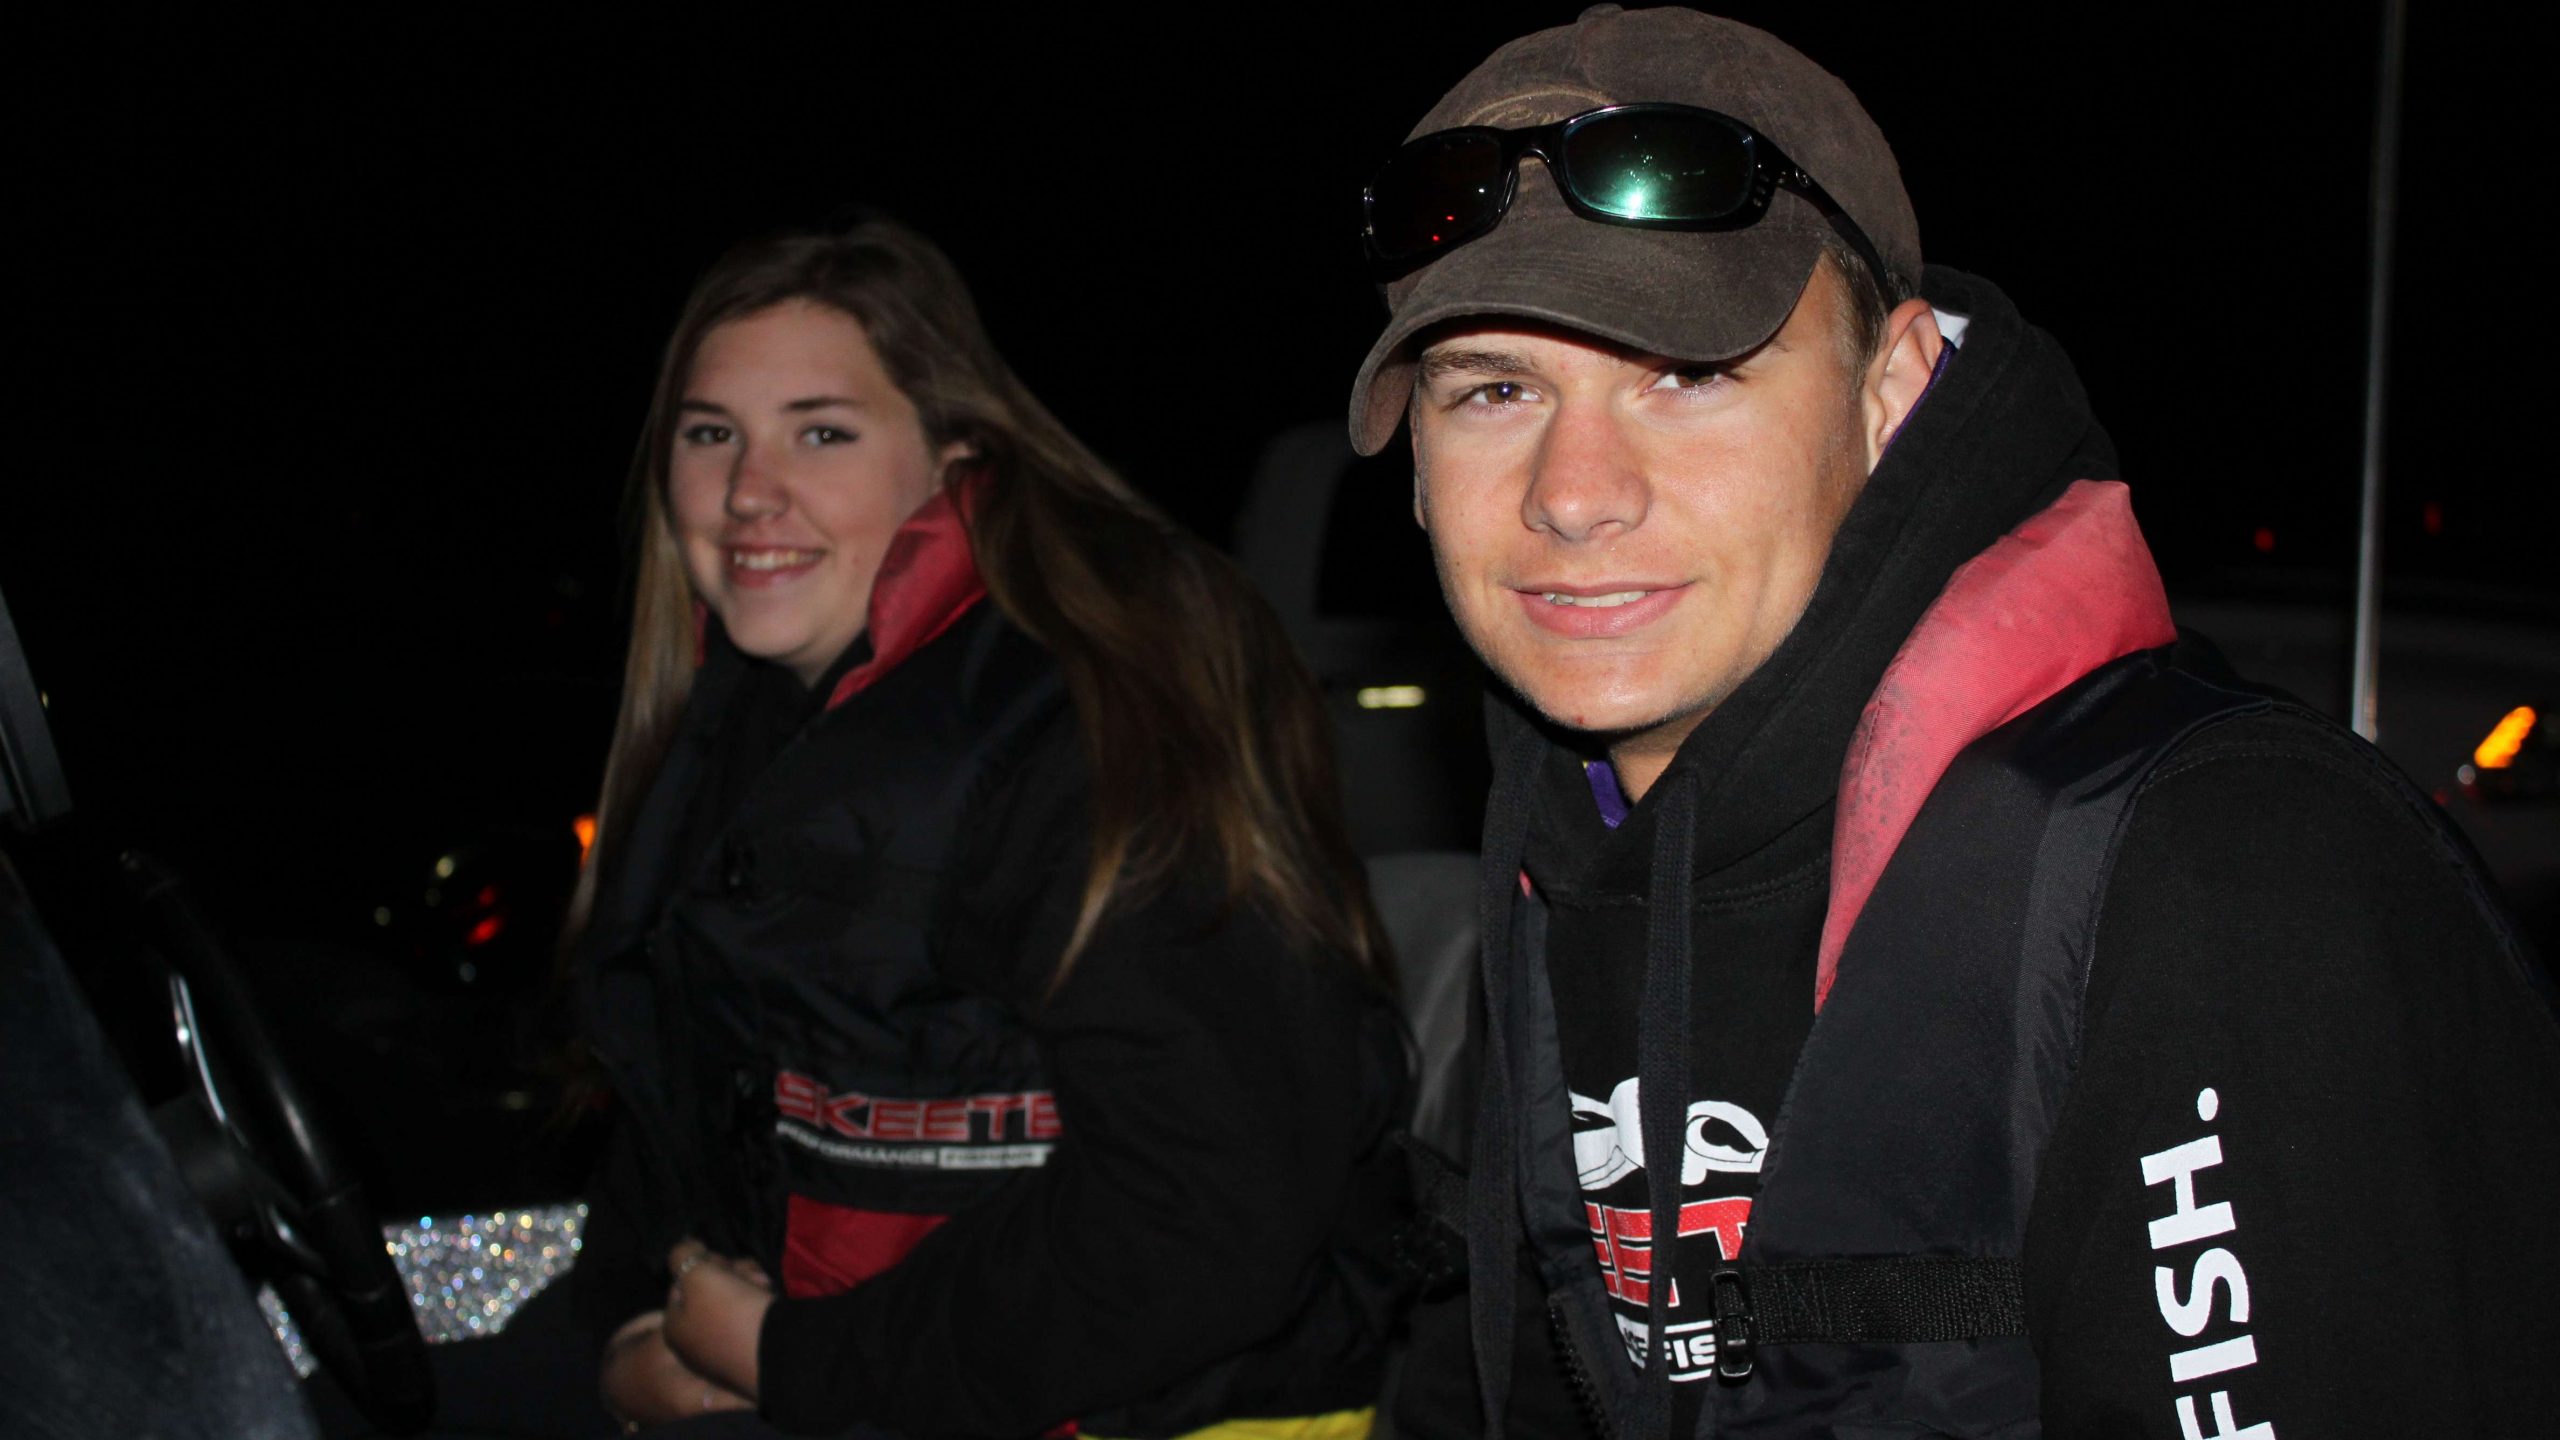 Annabelle Guins and Hayden Williams are in the long line to
launch before the Costa Bassmaster High School Central Open on Toledo
Bend Saturday morning near Many, Louisiana. B.A.S.S. officials
reported that 180 two-person teams registered for the open, and the
winning duo will collect prize money for the school's bass fishing
program. The top five teams here also will earn a spot in the High
School Classic coming up later this month in the Houston (Tex.) area.